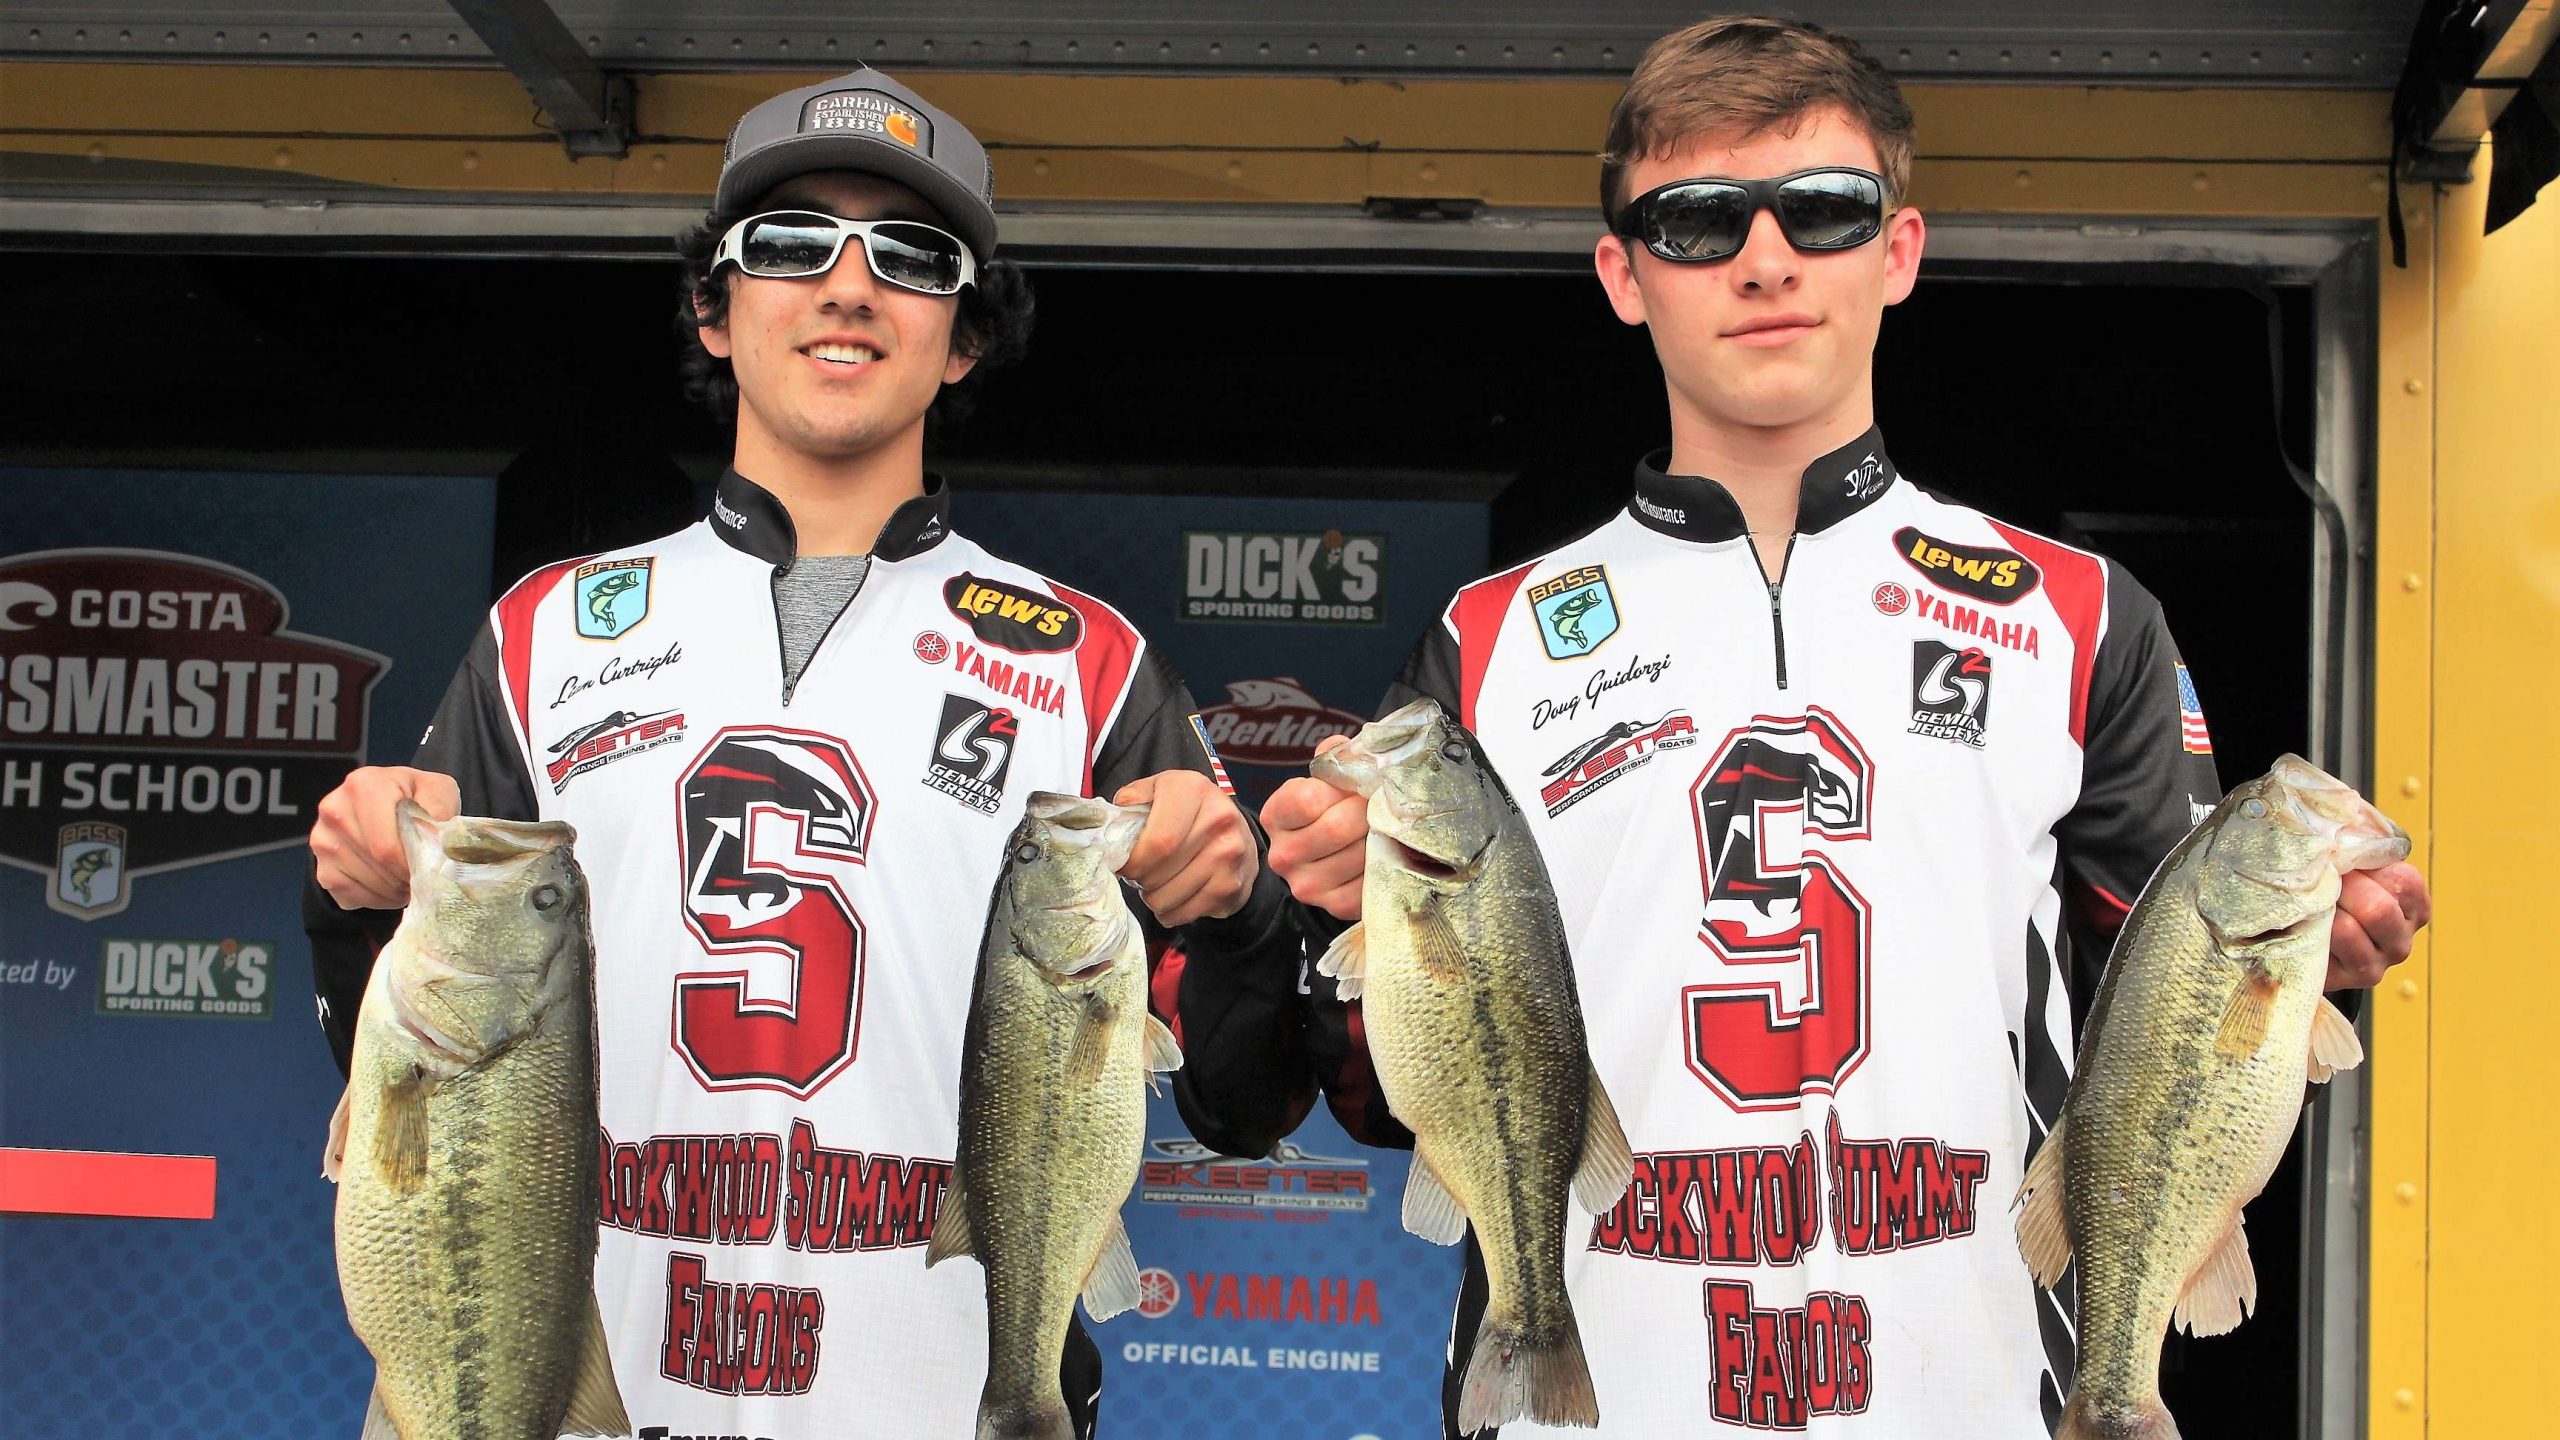 Doug Guidorzi and William Curtright of the Summit (Mo.) Falcons Fishing Club placed eighth with 12-4.